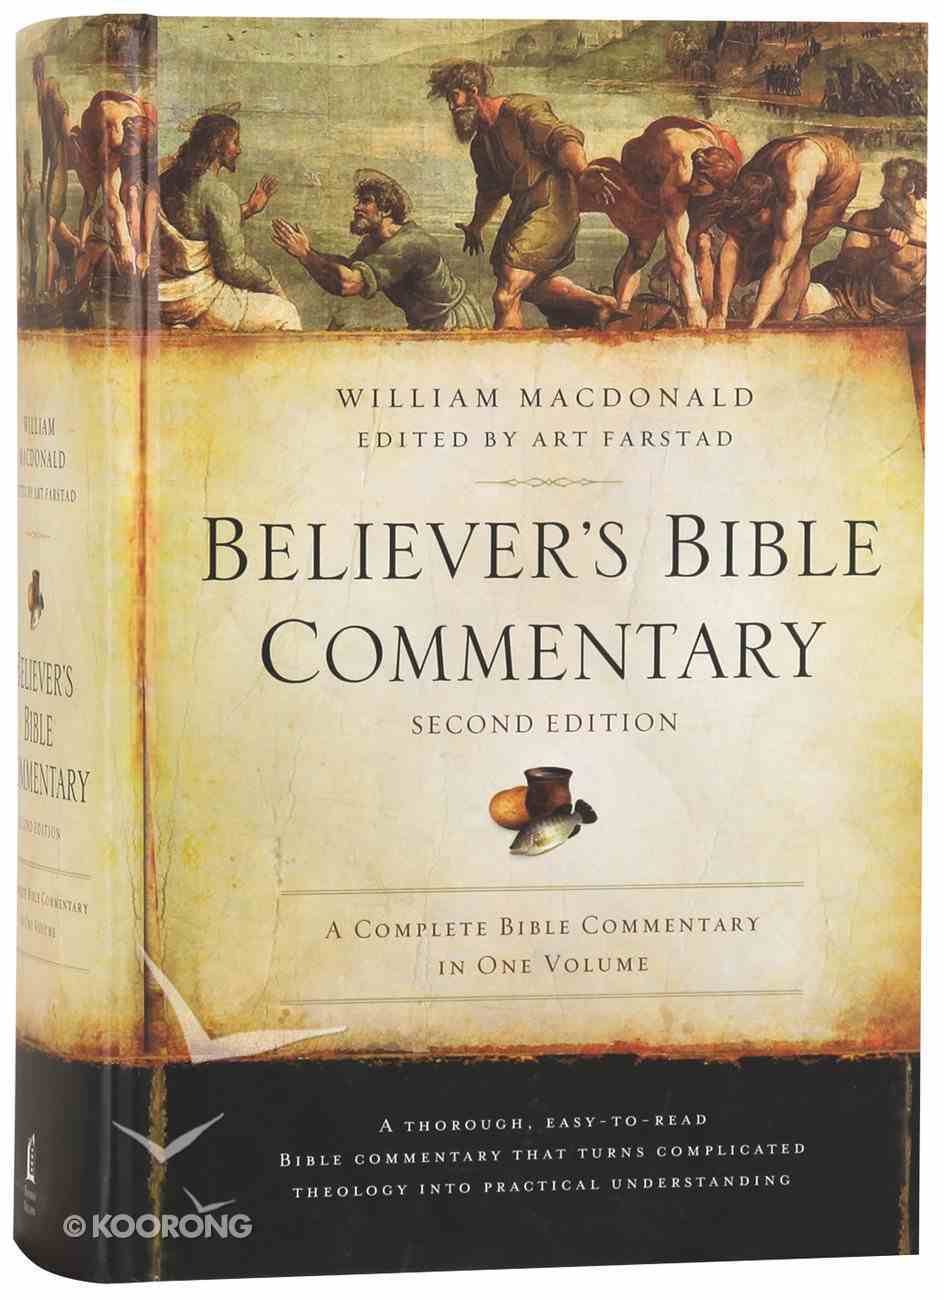 Believer's Bible Commentary 2016 Revised (2nd Edition) Hardback